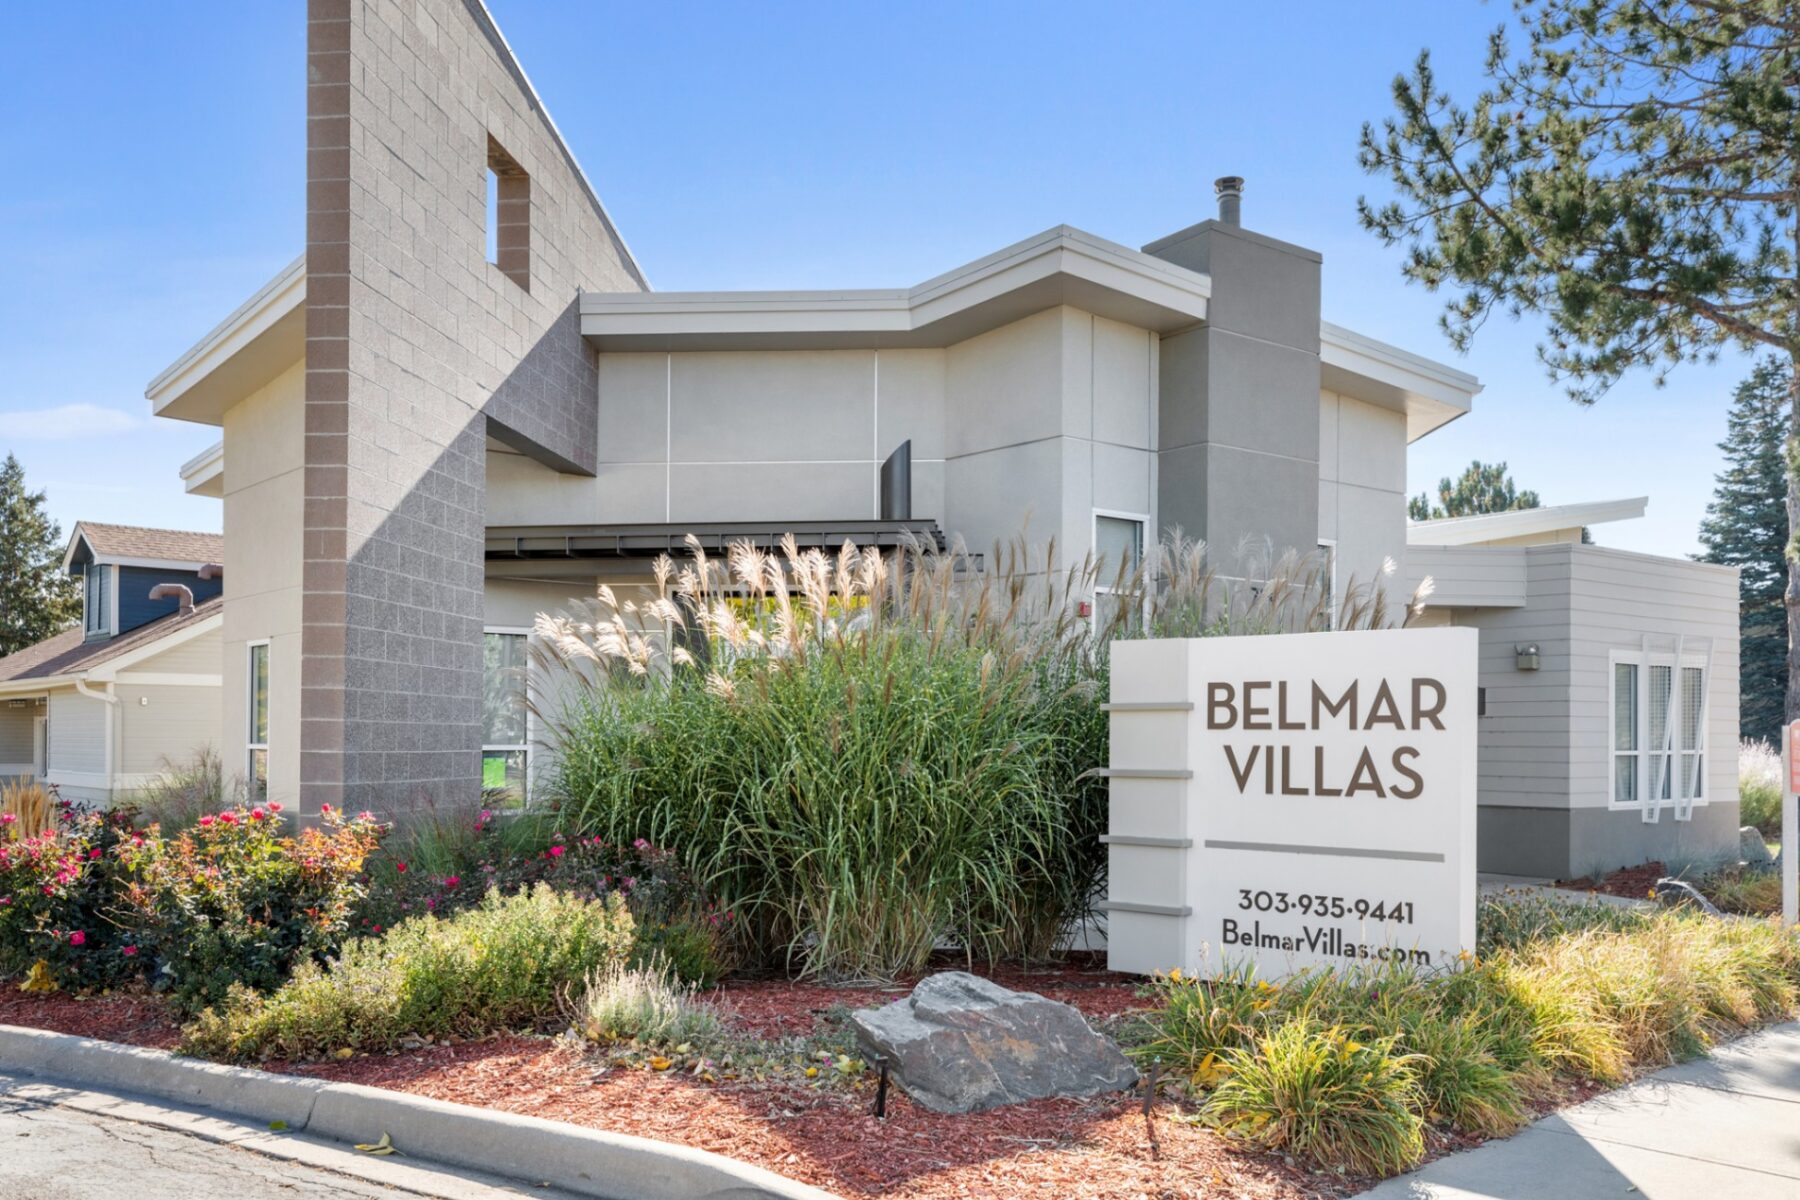 Exterior of leasing office with dense landscaping and monument sign for Belmar Villas